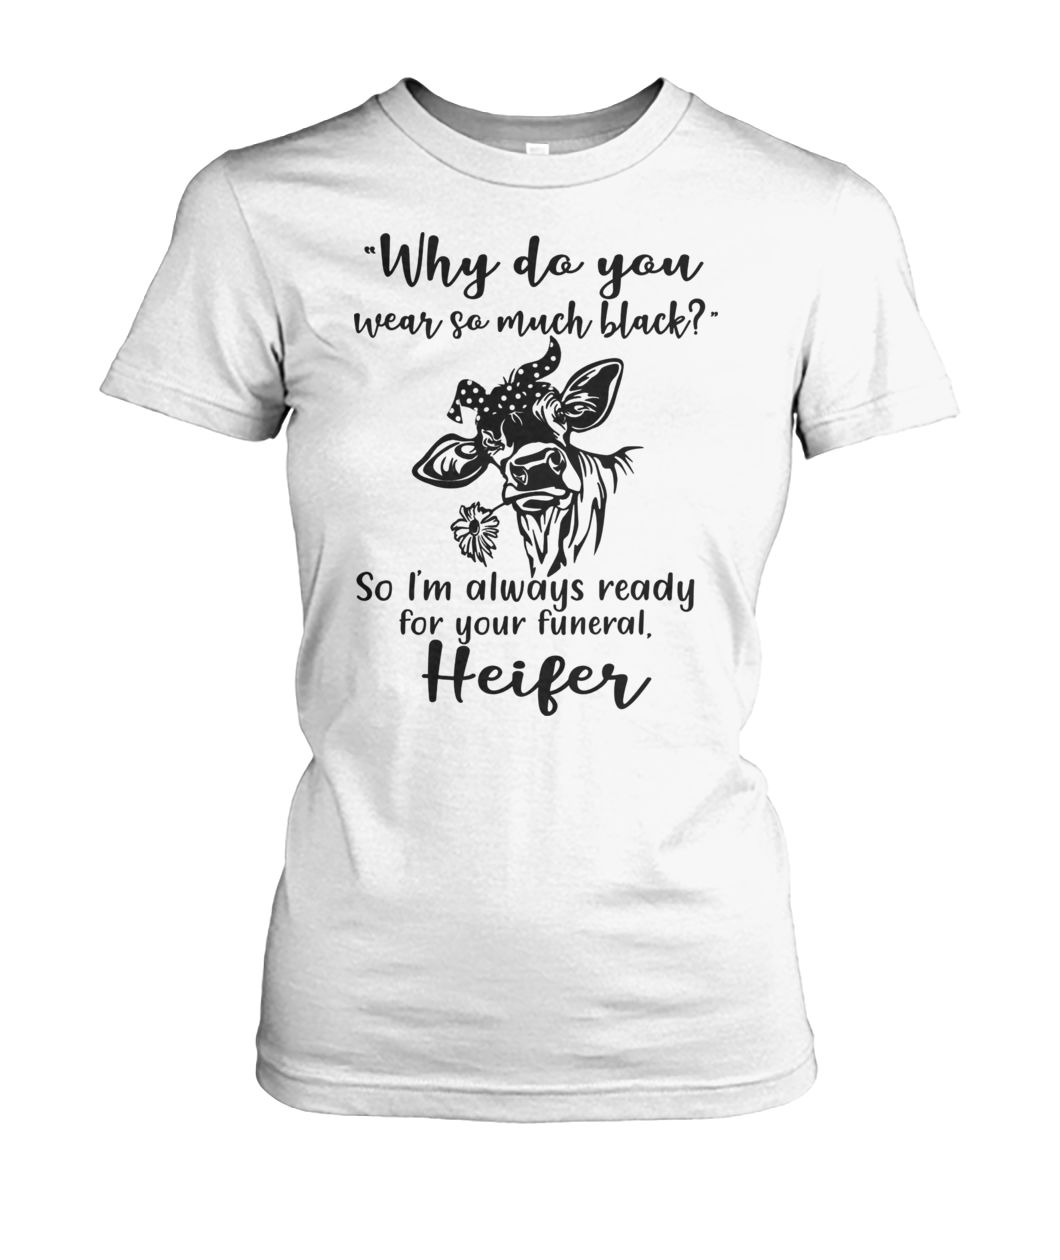 Heifer why do you wear so much black so i'm always ready for your funeral women's crew tee